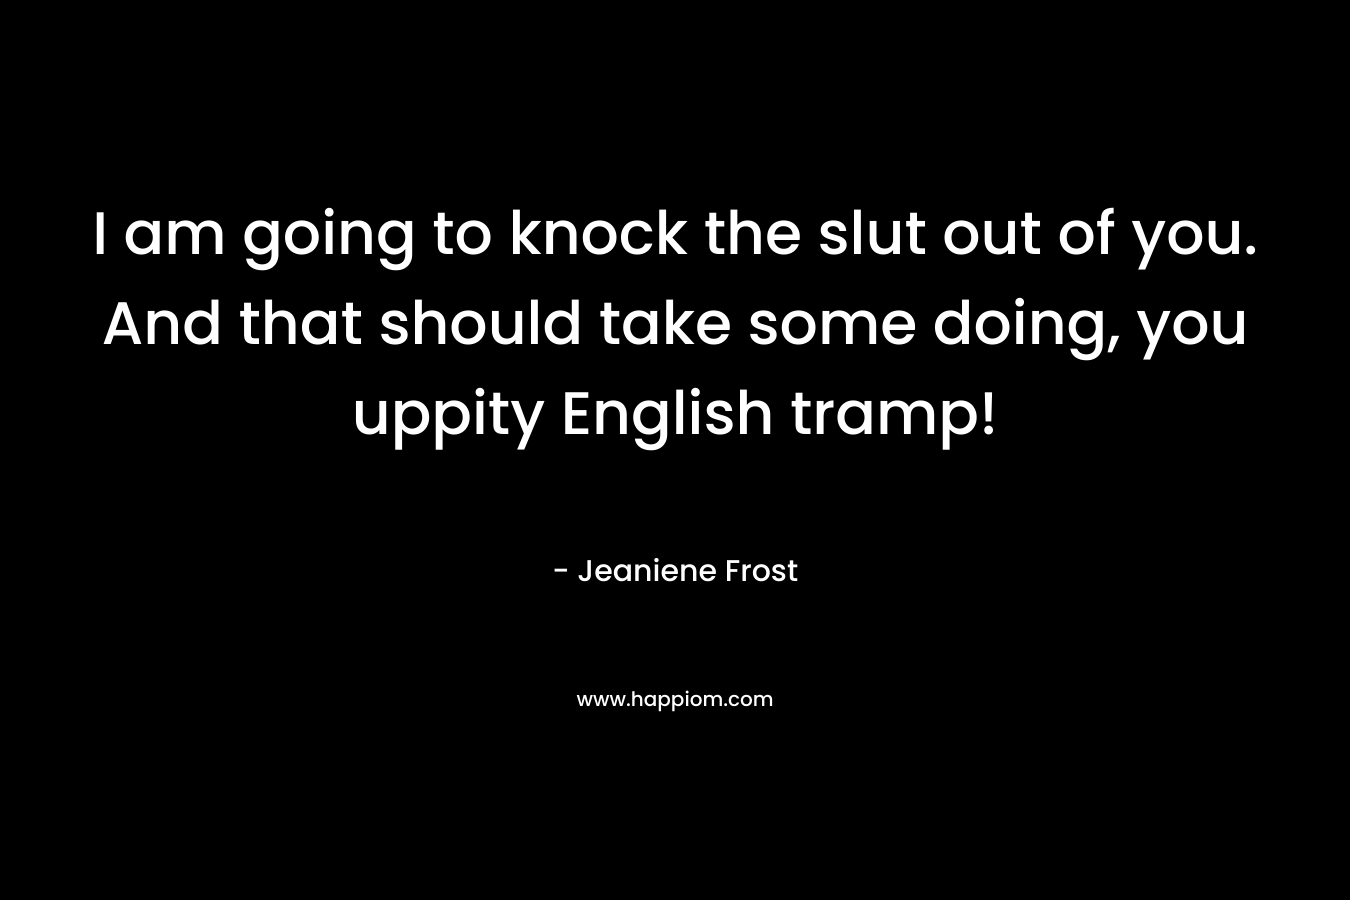 I am going to knock the slut out of you. And that should take some doing, you uppity English tramp! – Jeaniene Frost